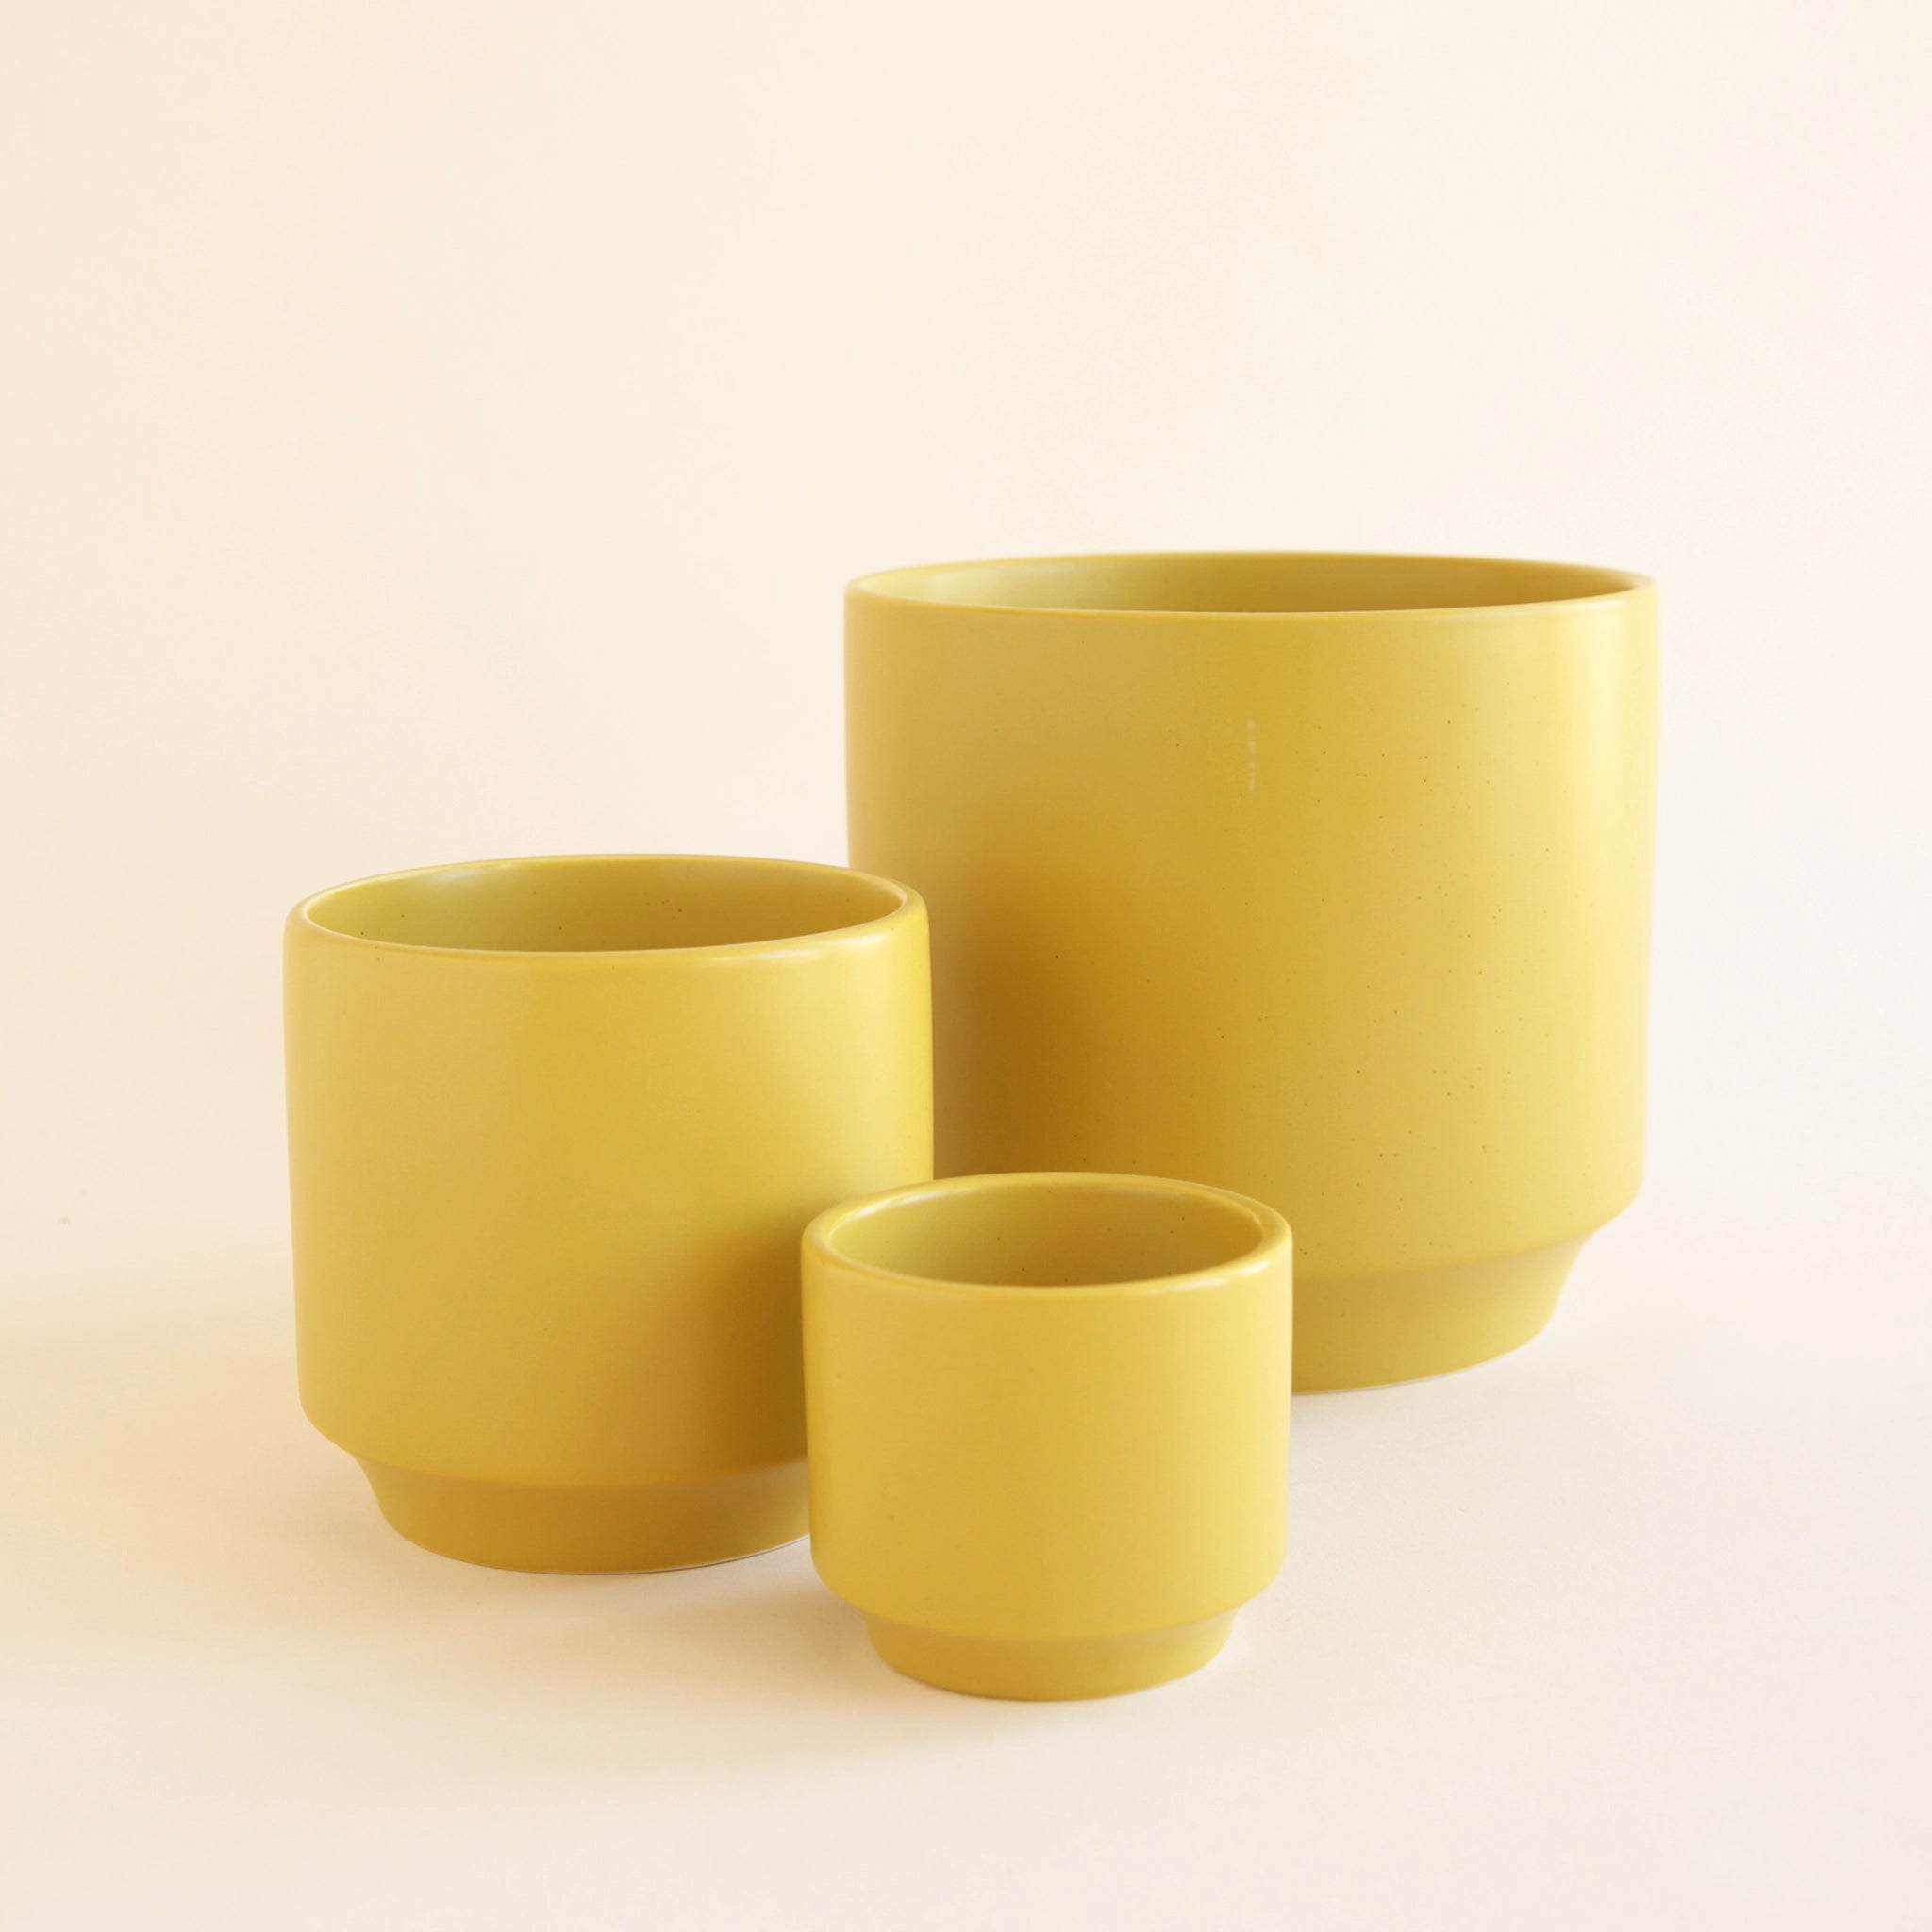 On an ivory background is three different sized ceramic planters in chartreuse shade with a slight speckle detail and a tapered base.